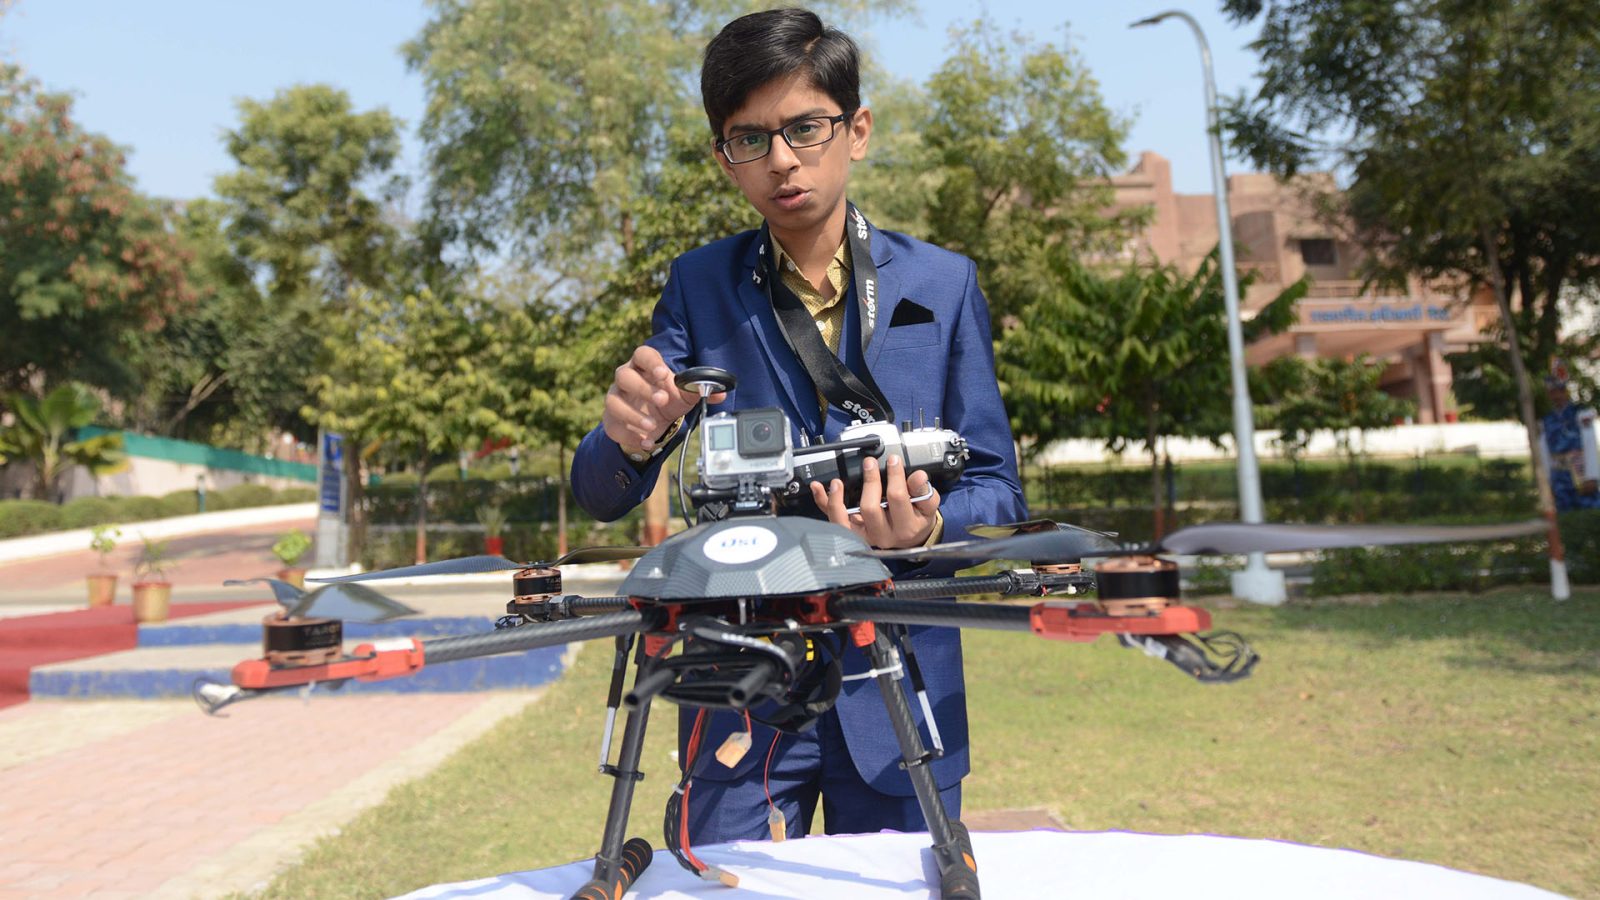 This 15-year-old boy developed a drone designed to detect and destroy landmines